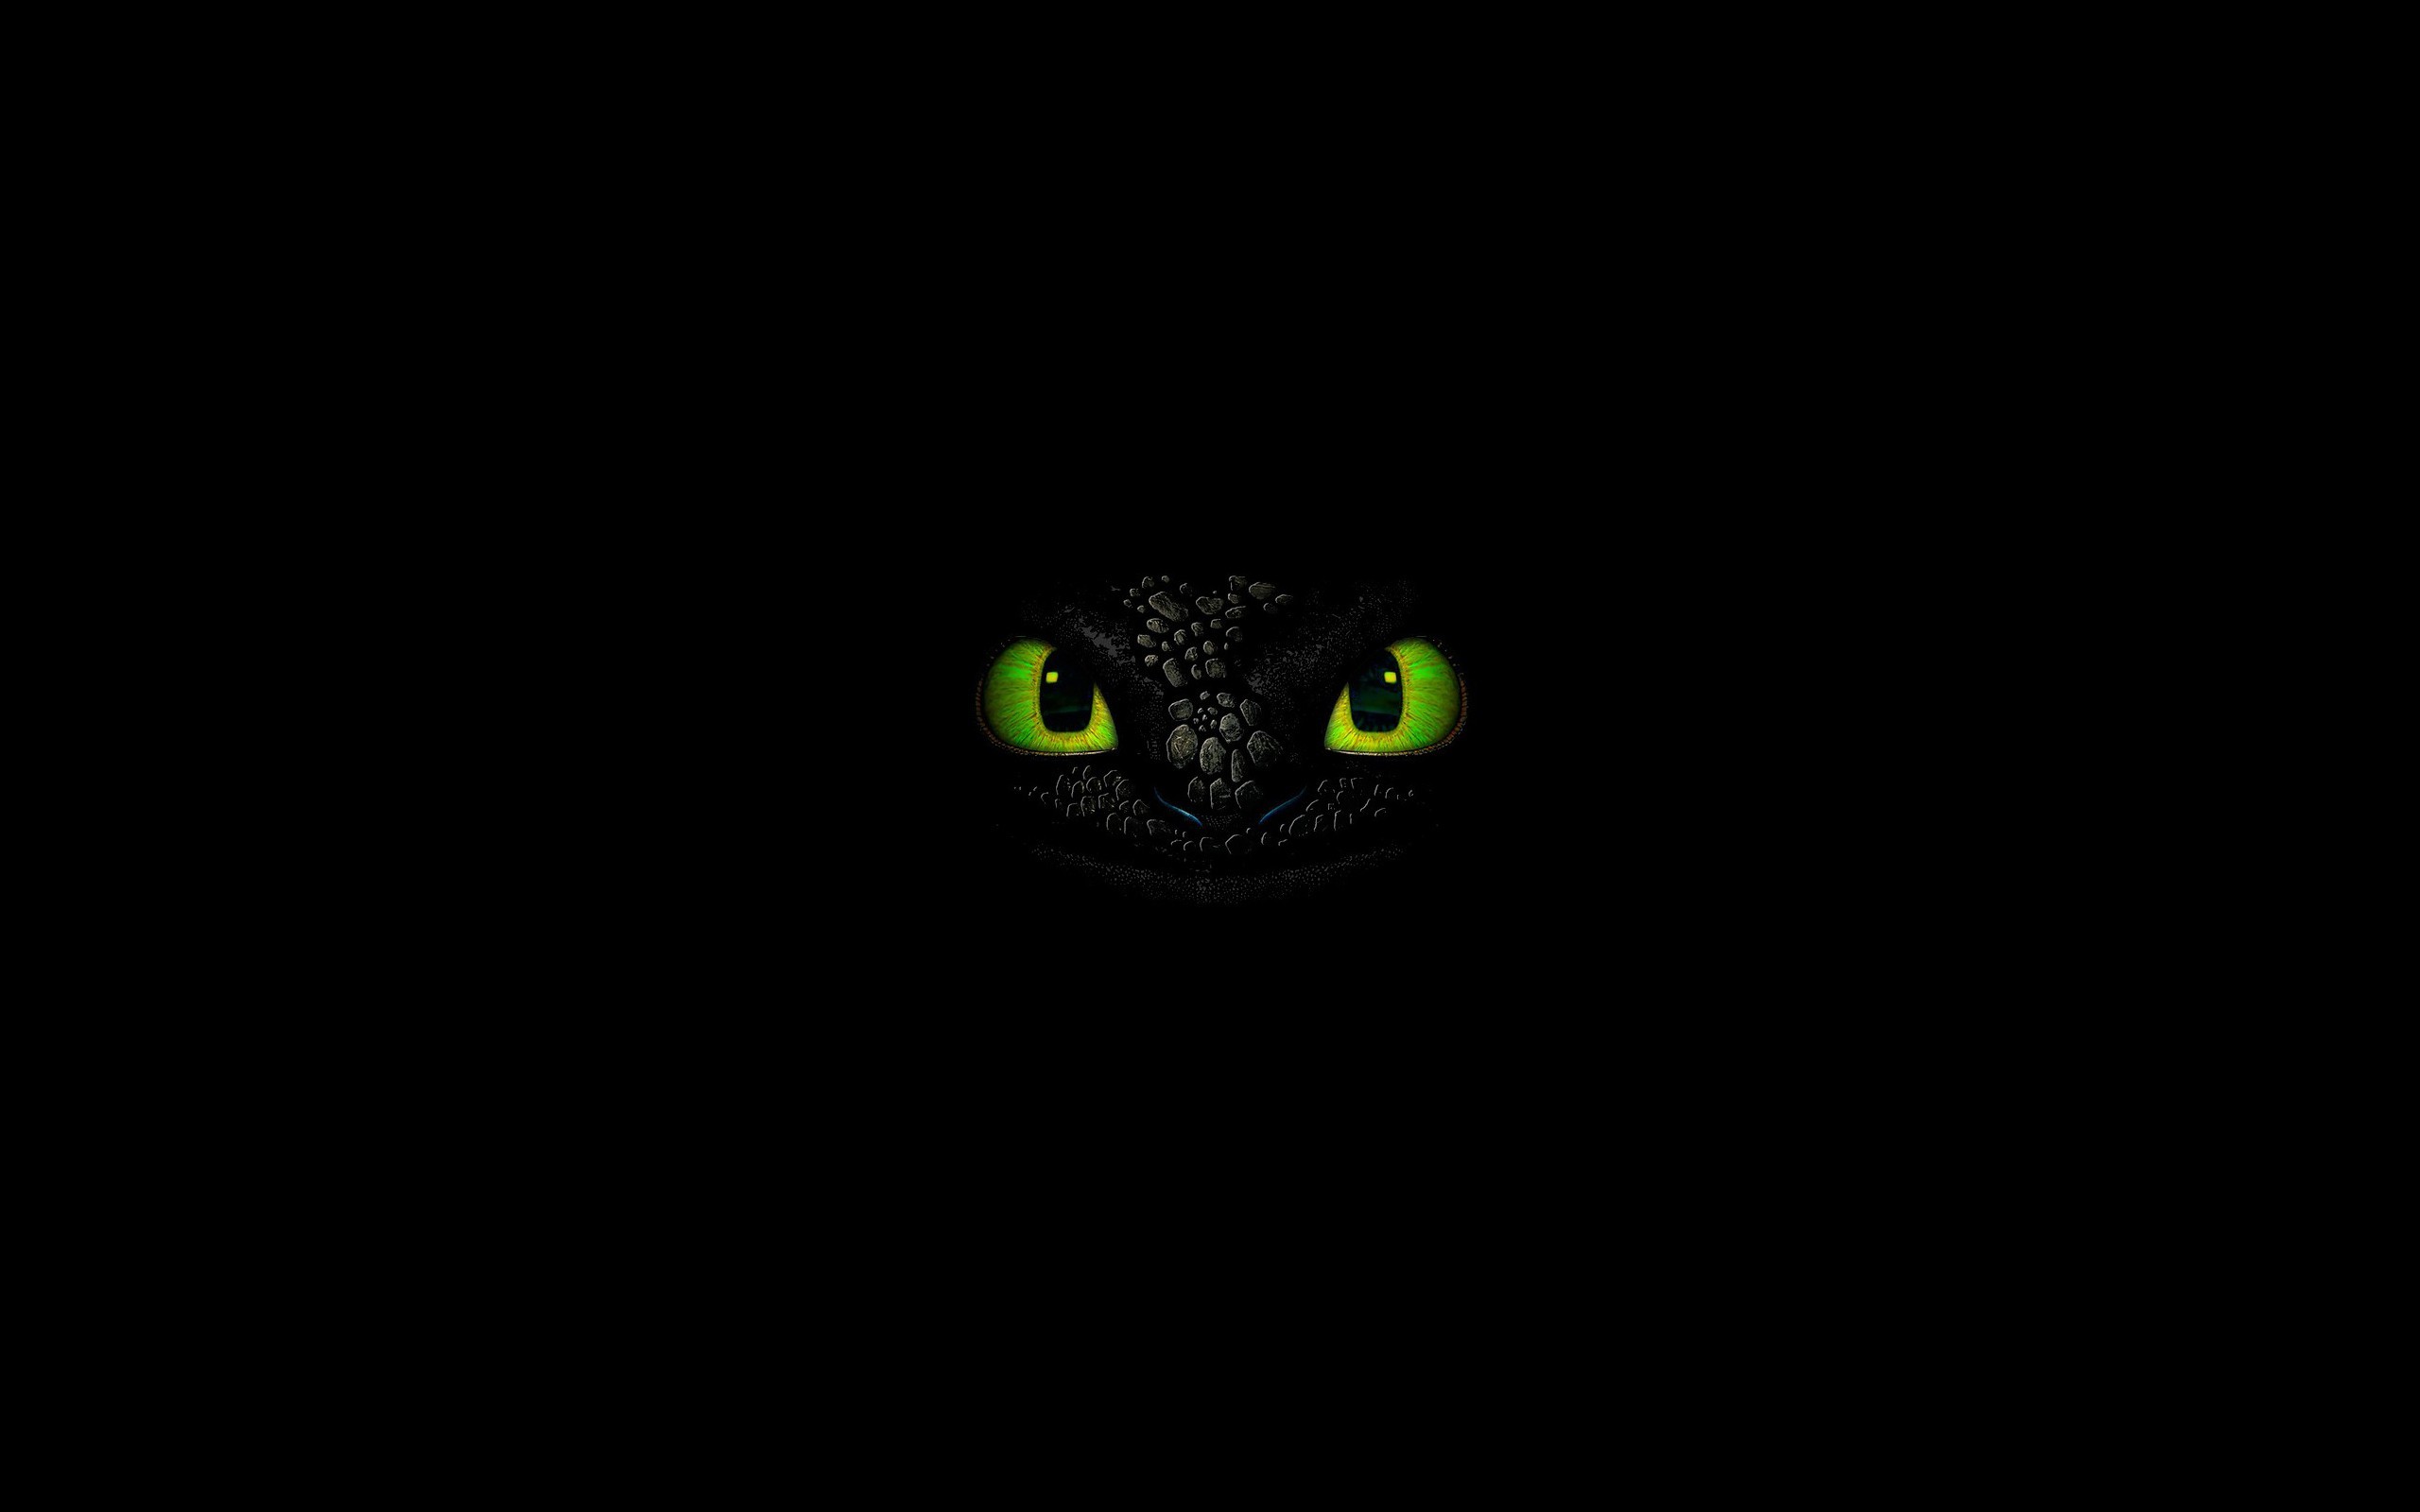 Wallpaper simple background movies dragon how to train your dragon black cat darkness screenshot x px puter wallpaper cat like mammal small to medium sized cats x